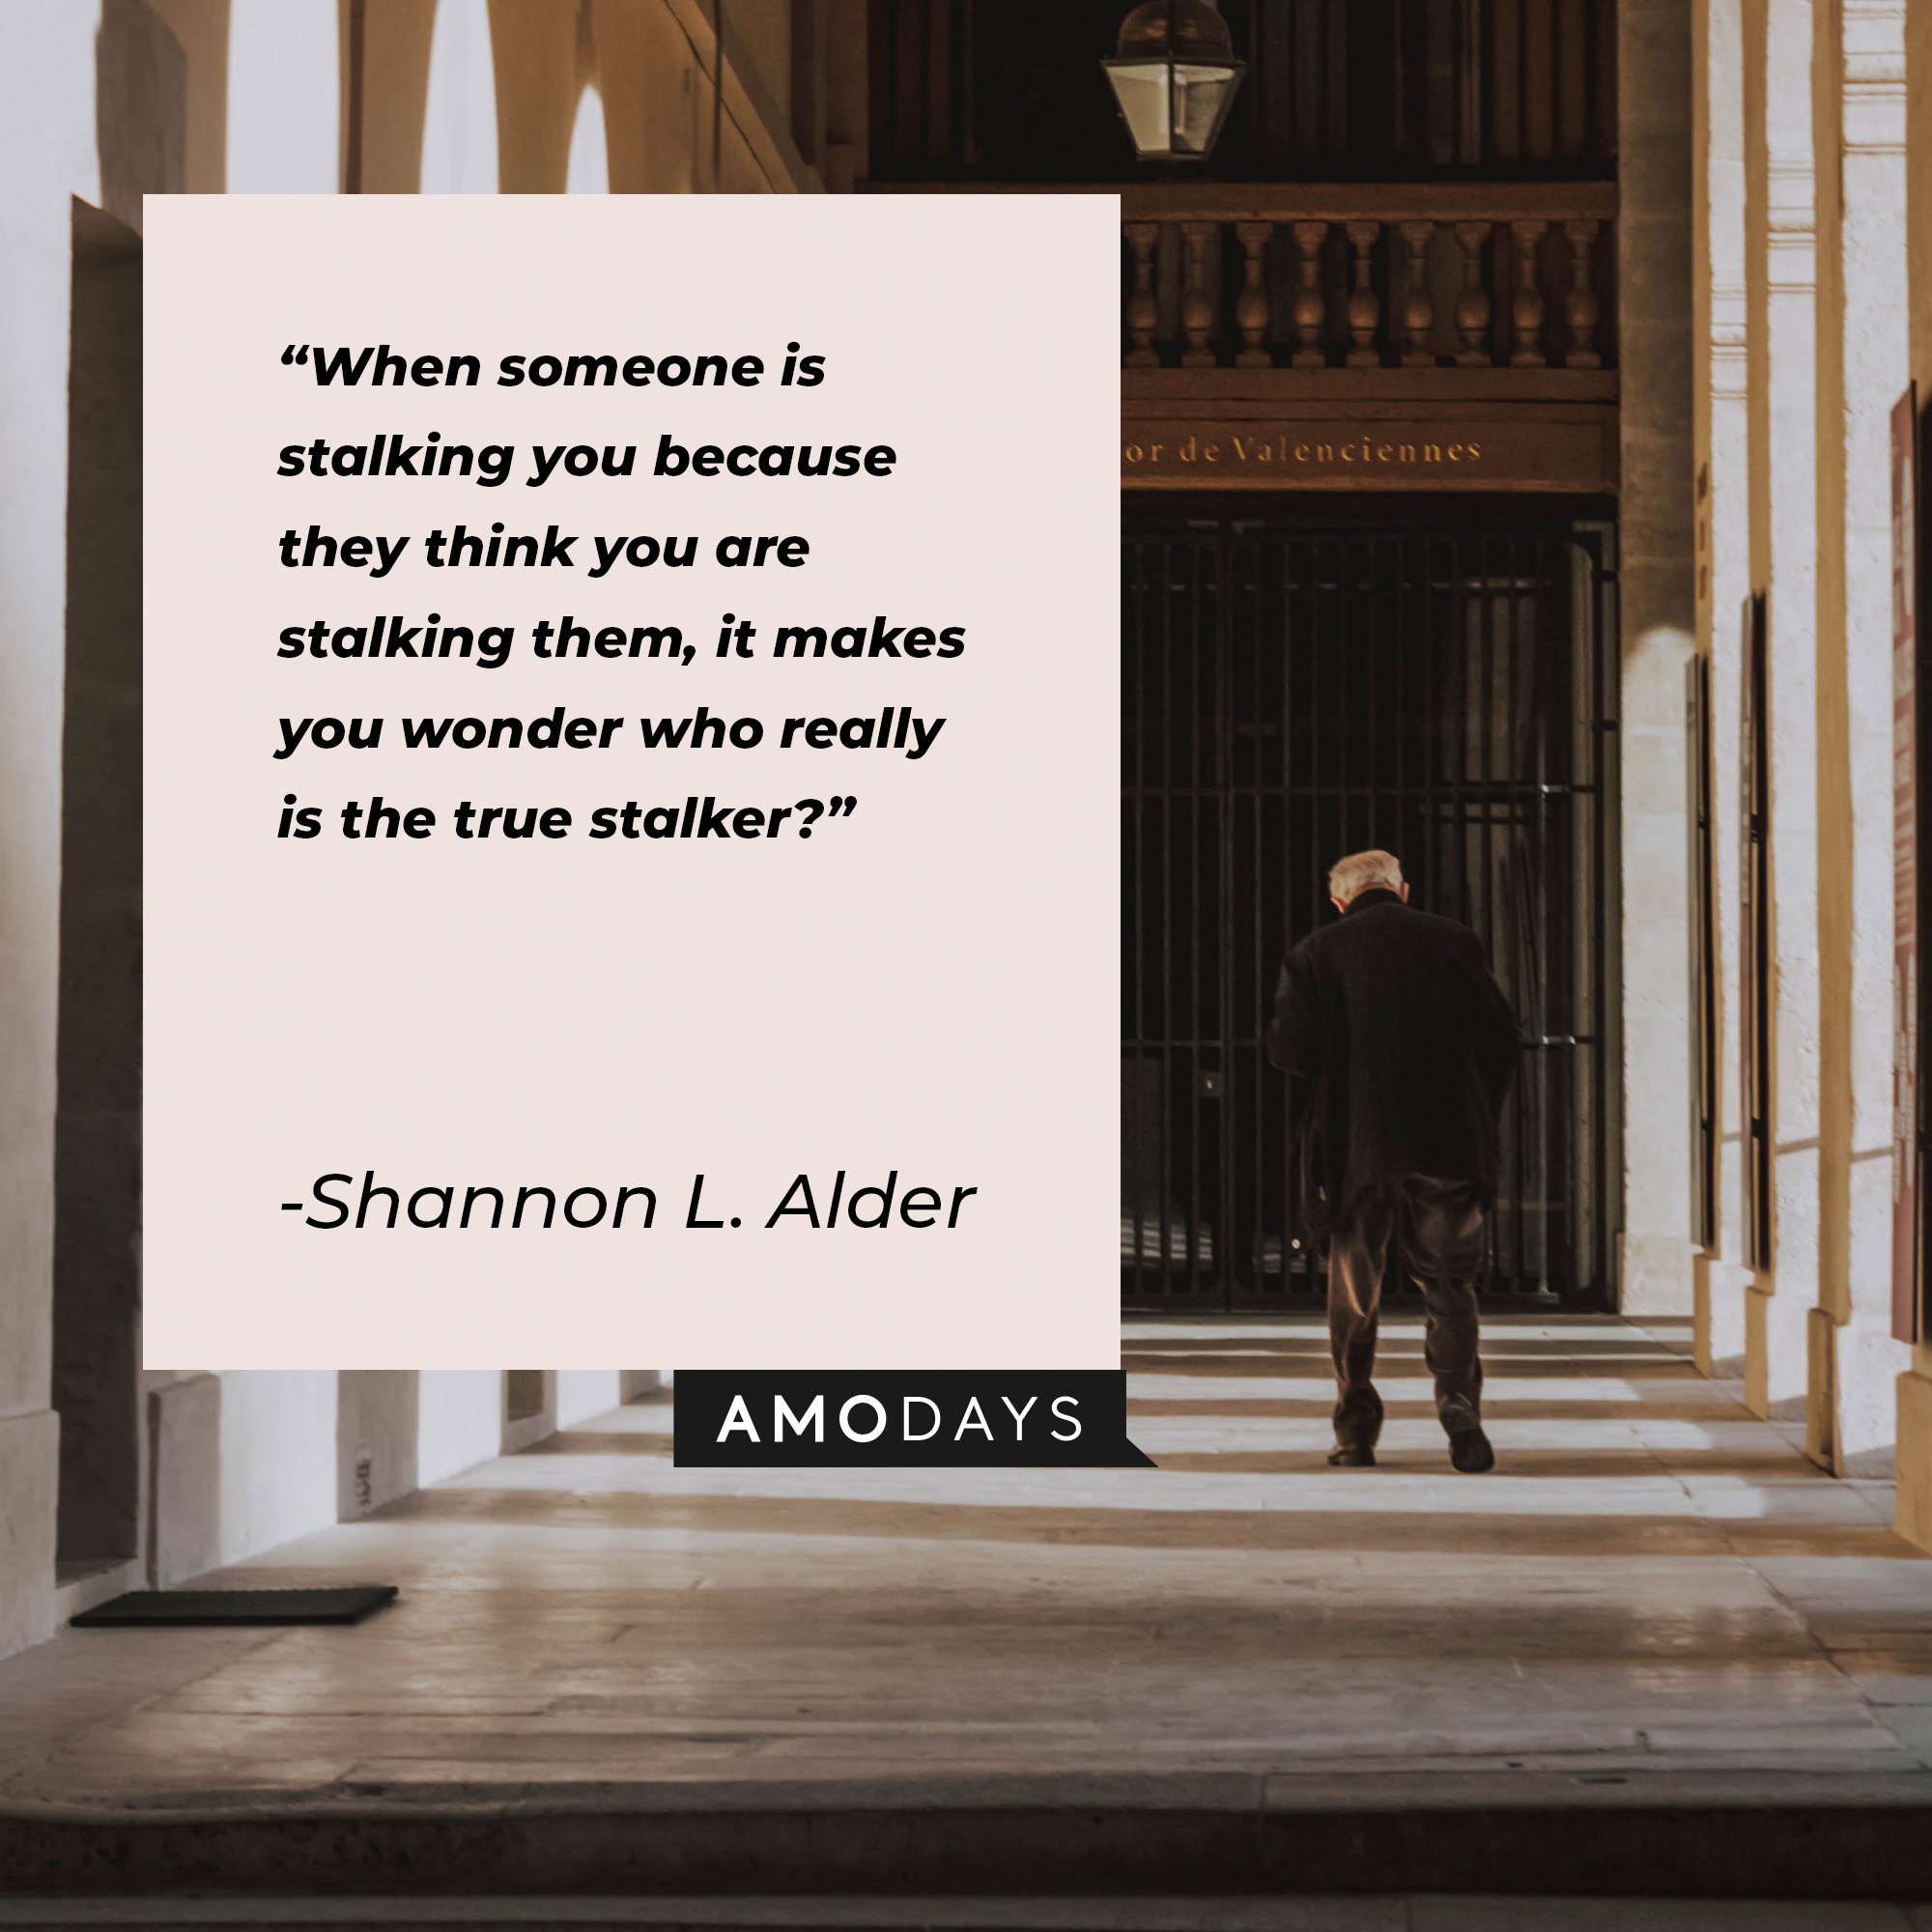 Shannon L. Alder’s quote: "When someone is stalking you because they think you are stalking them, it makes you wonder who really is the true stalker?" | Image: AmoDays